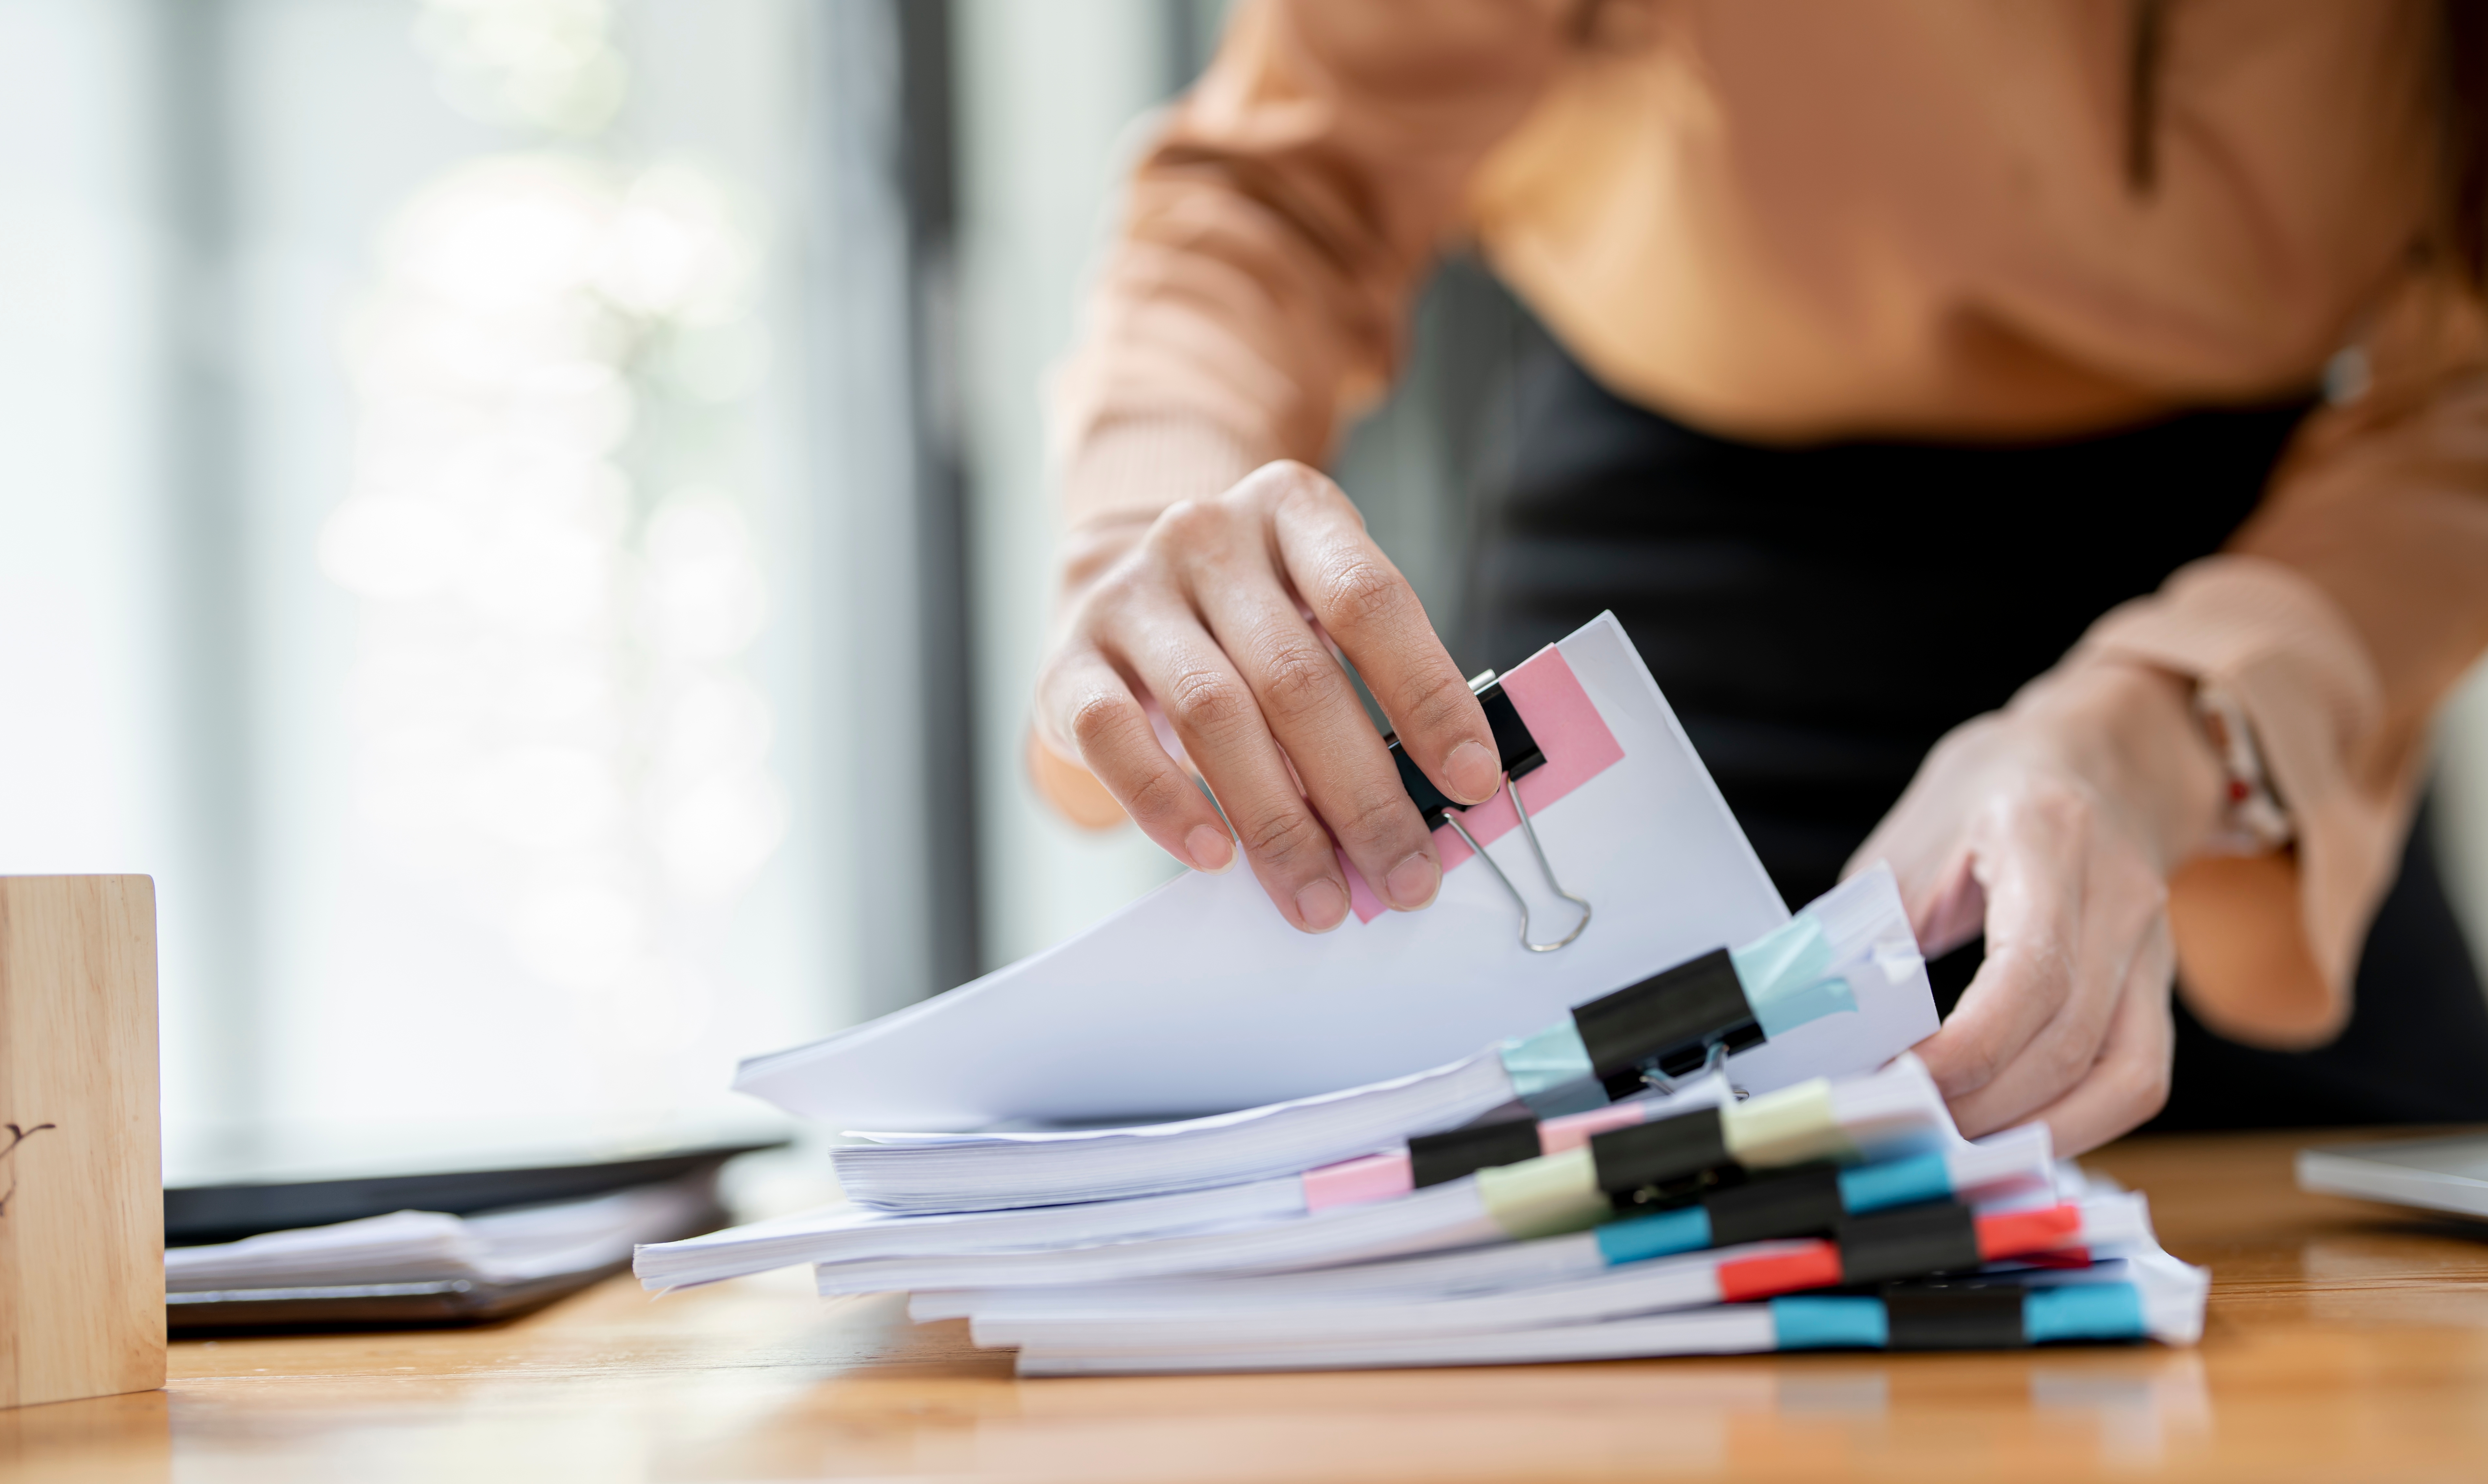 Businesswoman hands working in Stacks of paper files for searching documents | Source: Shutterstock.com